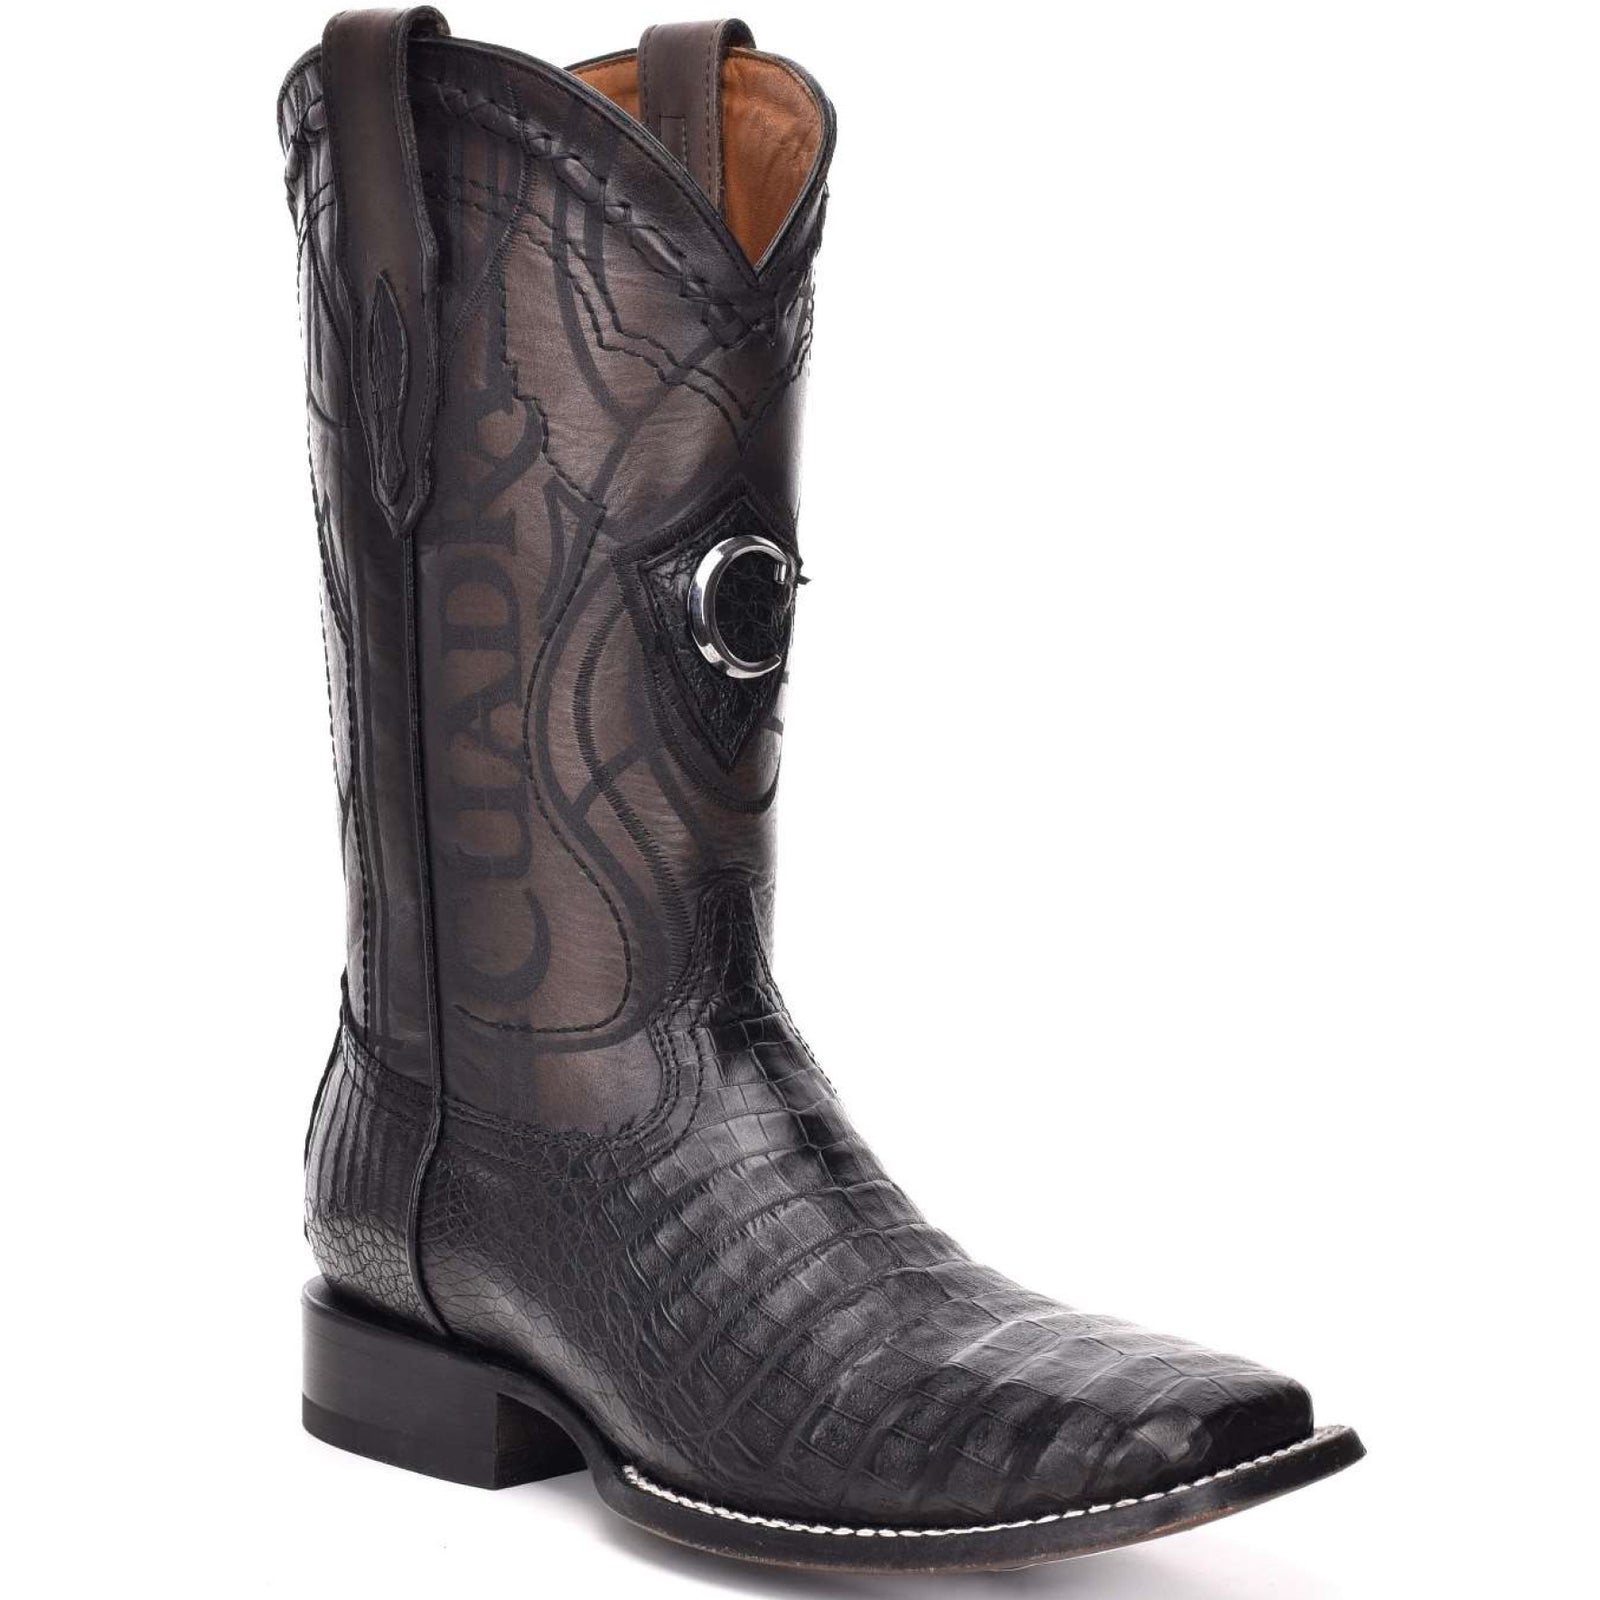 black square toe western boots